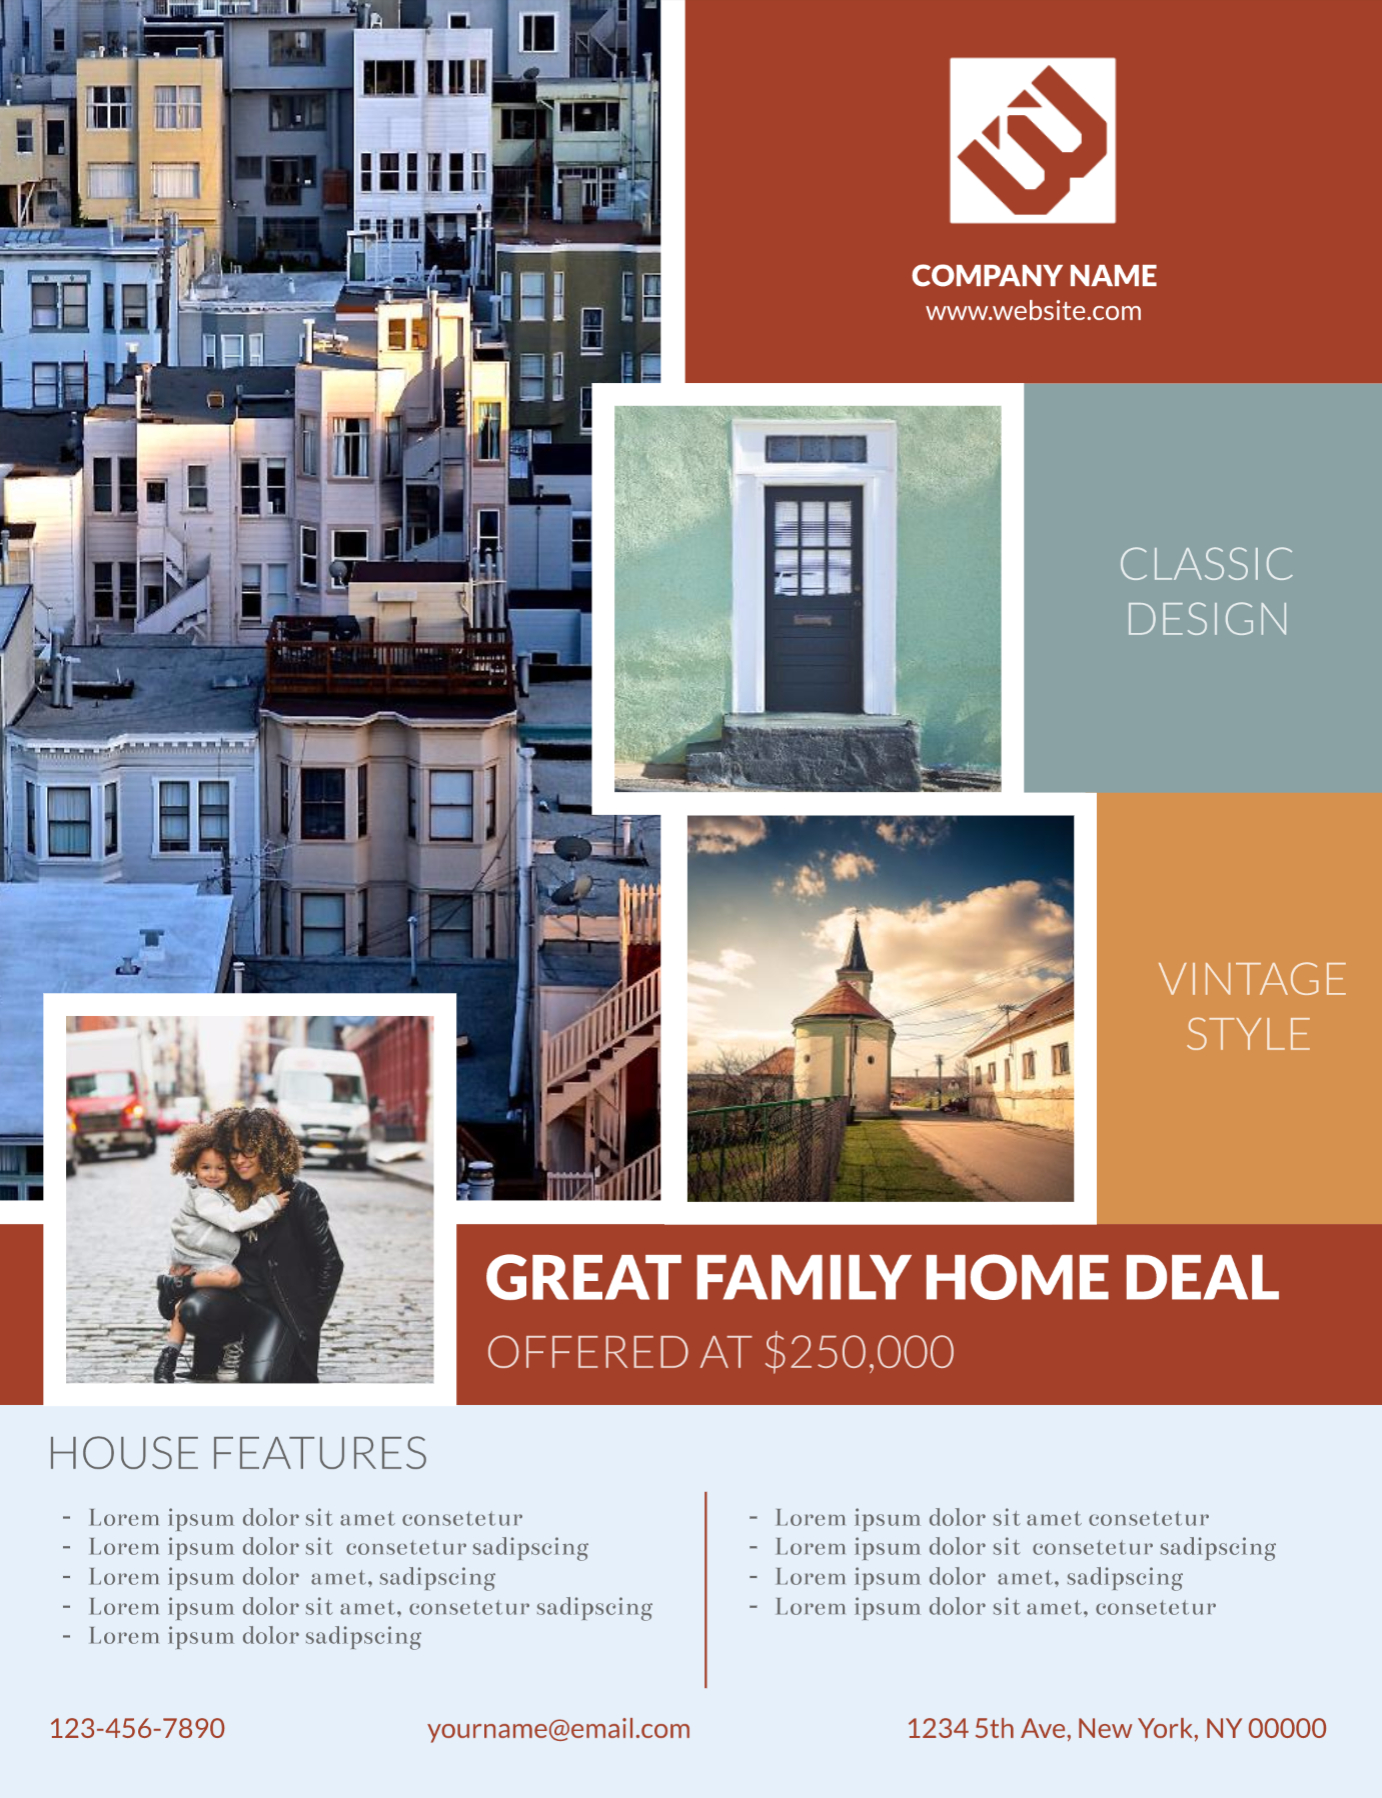 Bungalow Real Estate Flyer Template | Real Estate Marketing Ideas - Free Printable Real Estate Flyer Templates